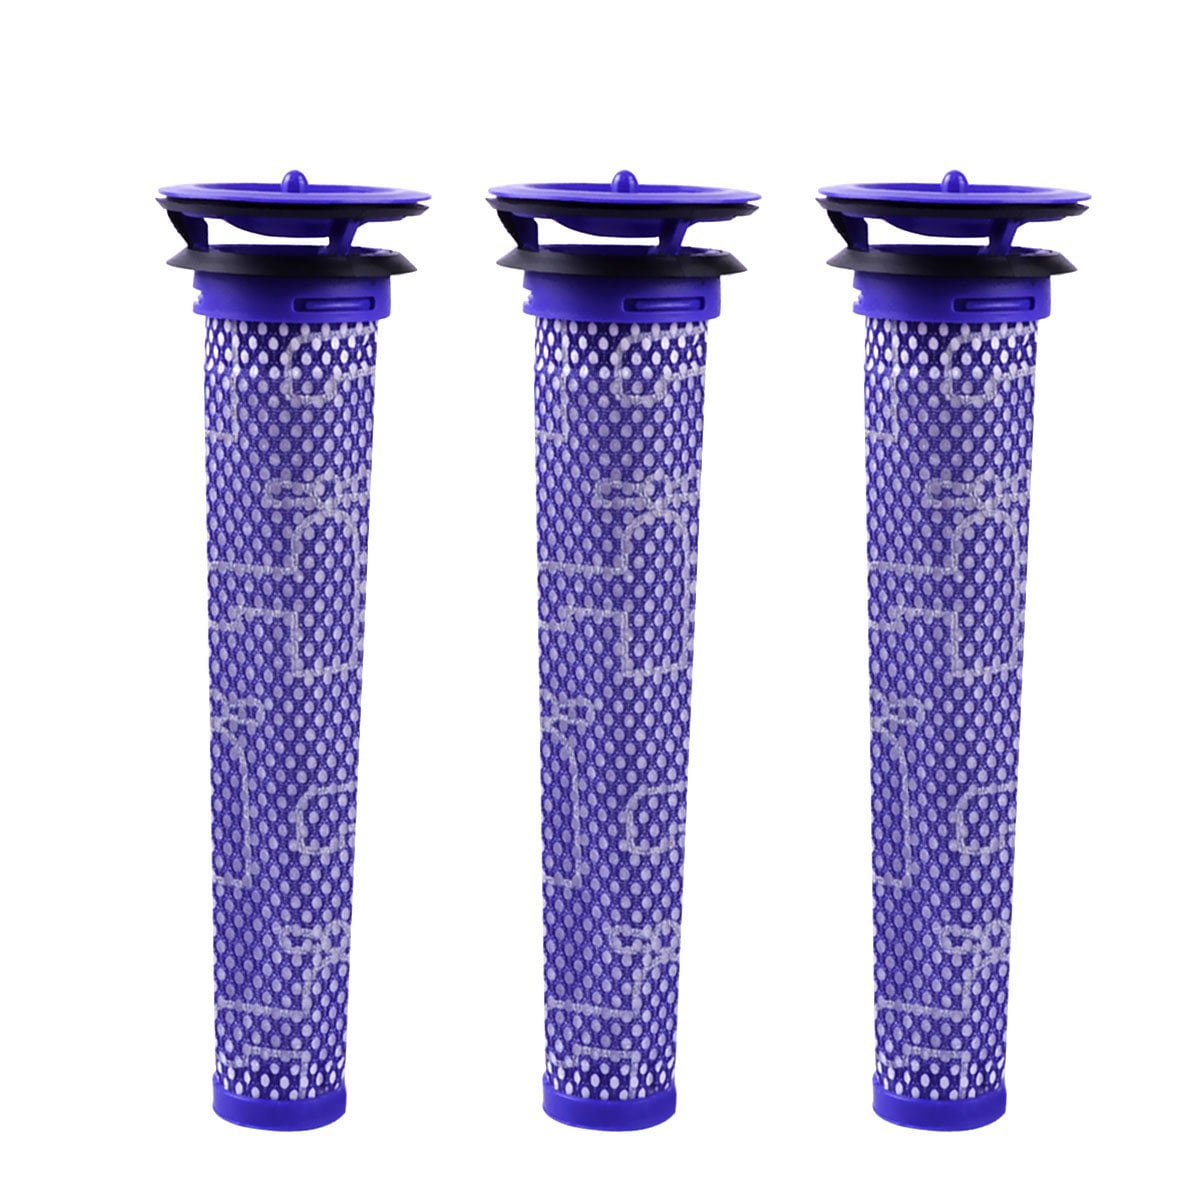 KEEPOW Replacement filters for Dyson V8 V6 V7 DC58 DC59 DC61 DC62